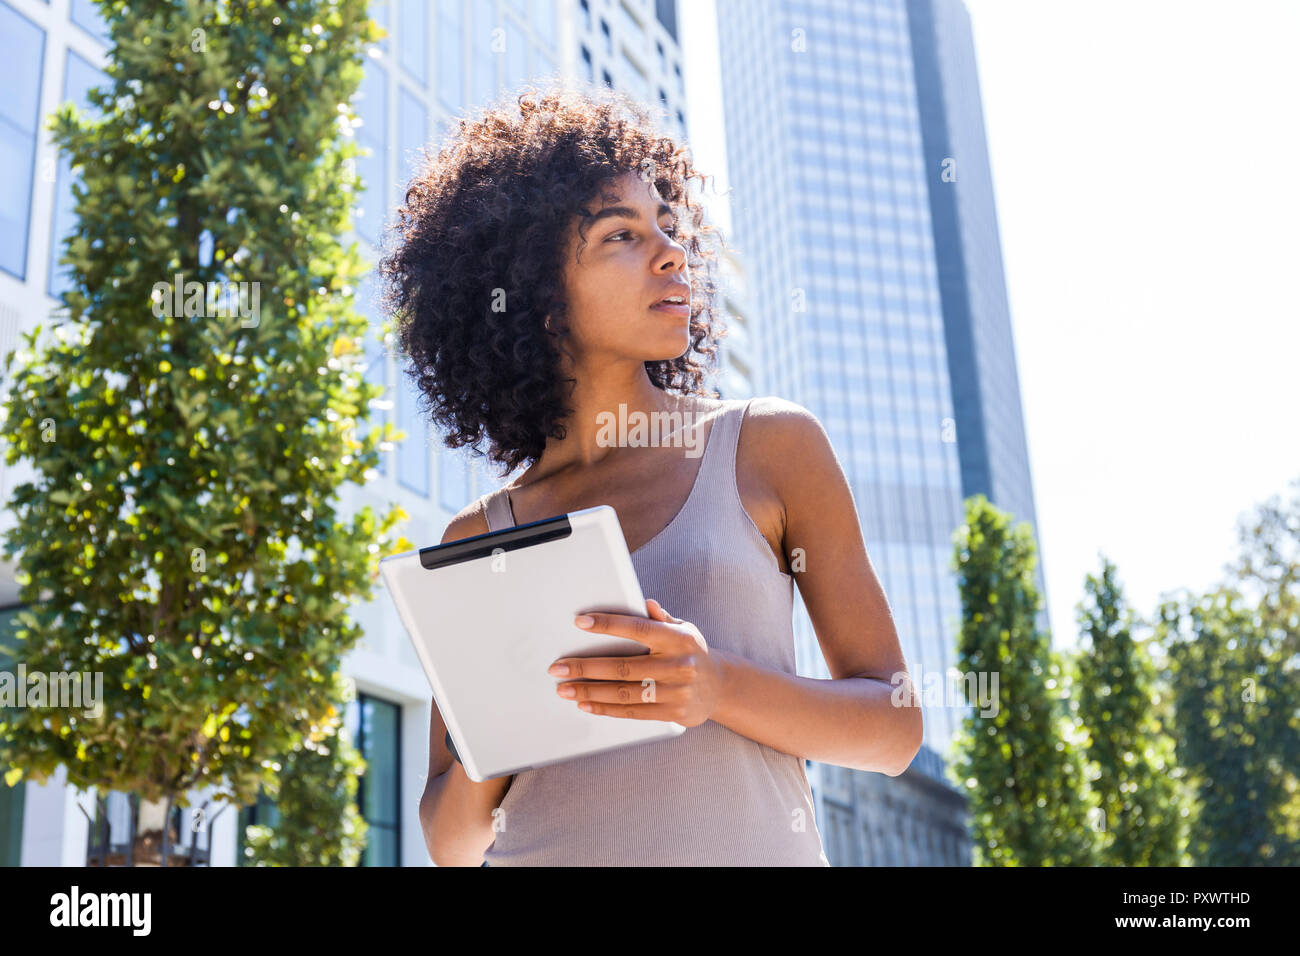 Germany, Frankfurt, young woman with tablet in the city Stock Photo